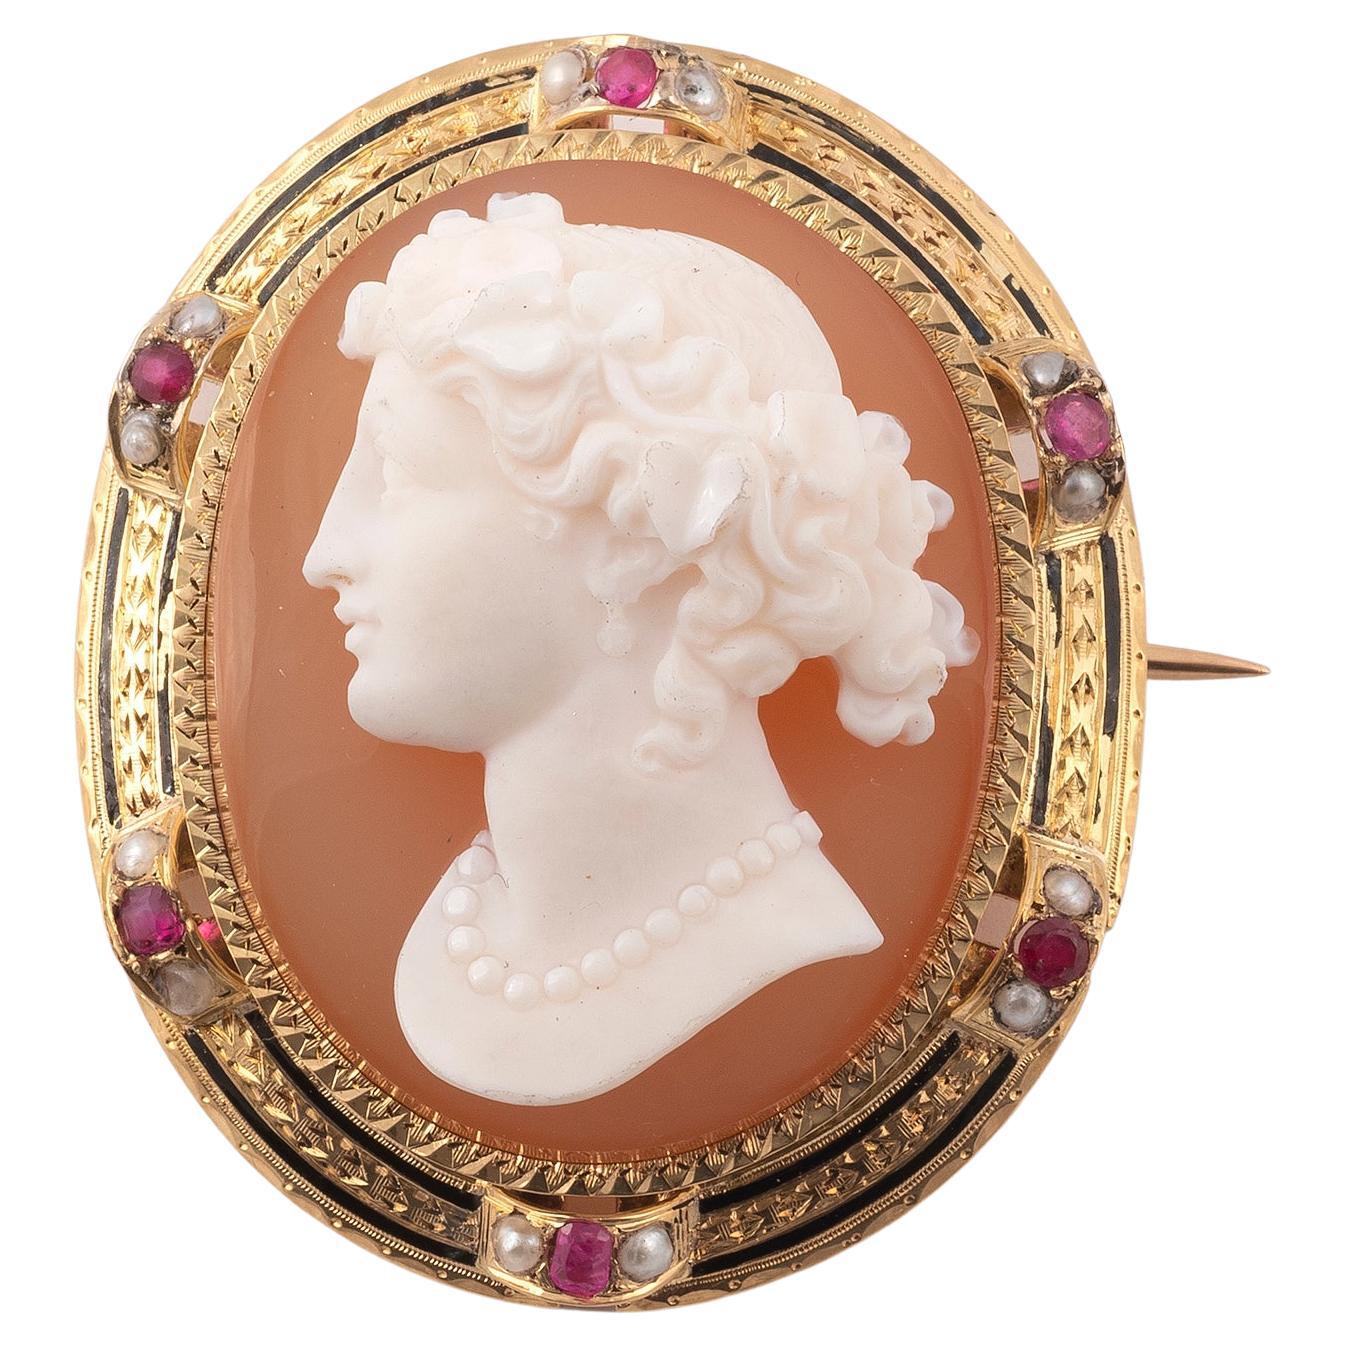 Brooch with a cameo on agate in an oval decoration punctuated with rubies, white pearls and black enamel. 18K yellow gold frame. French work. Original box. Dimensions: 4.5 x 3.80 cm.  Weight: 26.56 g.